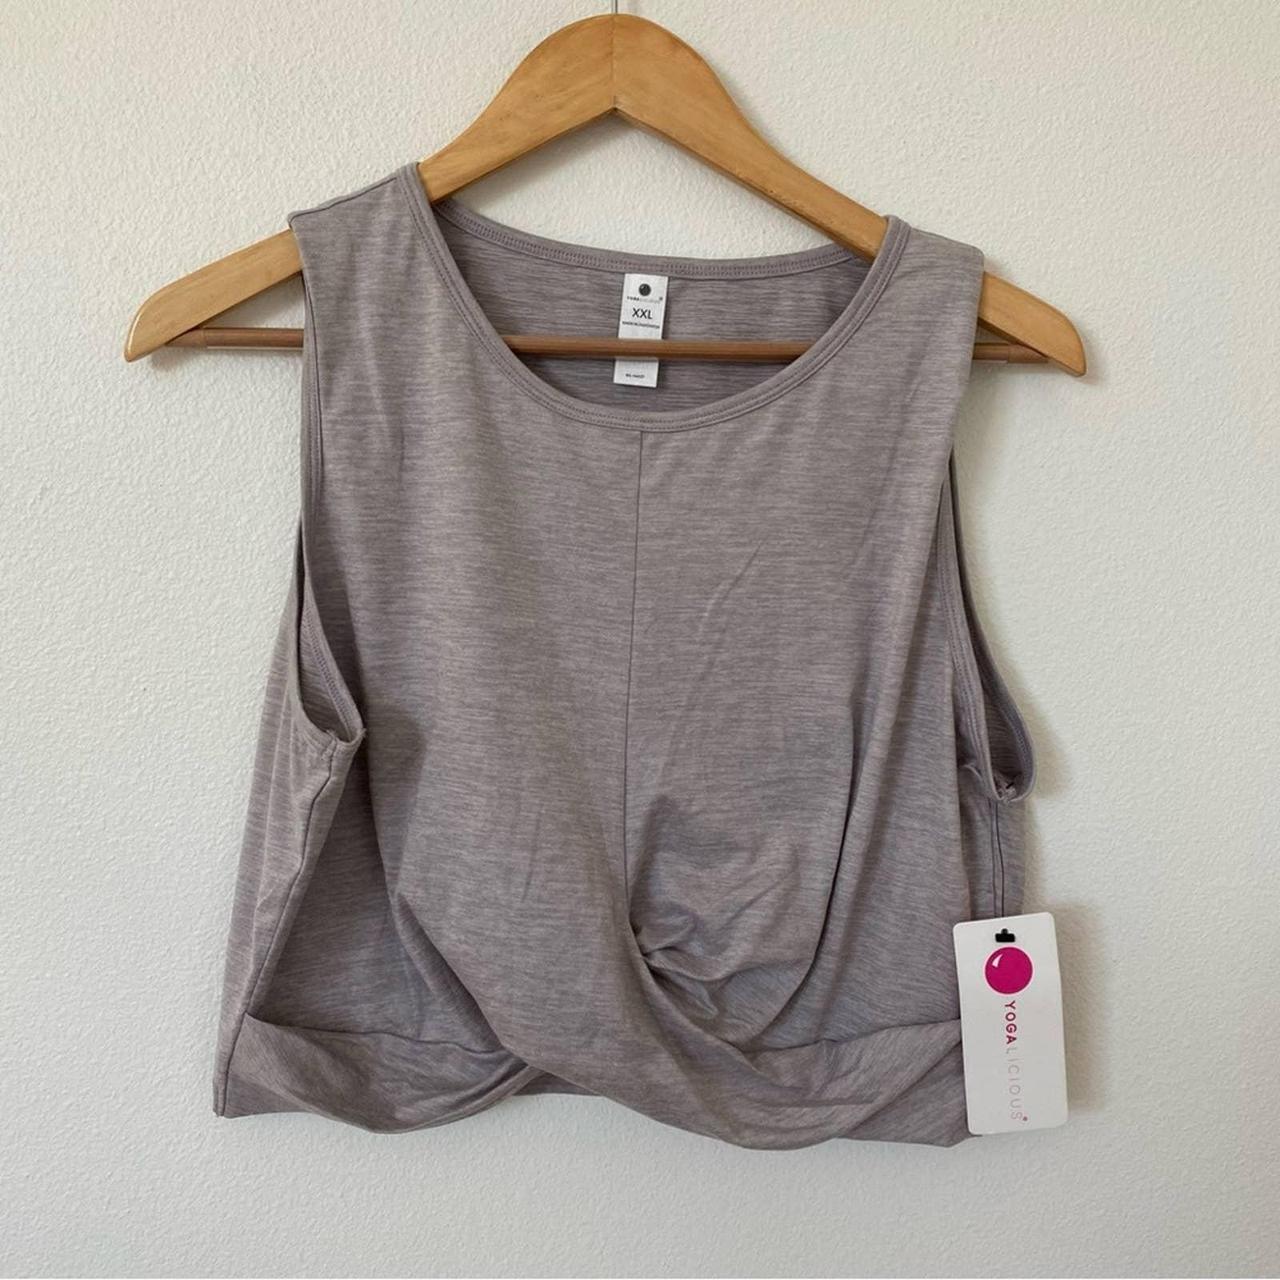 Yogalicious Womens Cropped Tee Size Medium Gray Twist Front